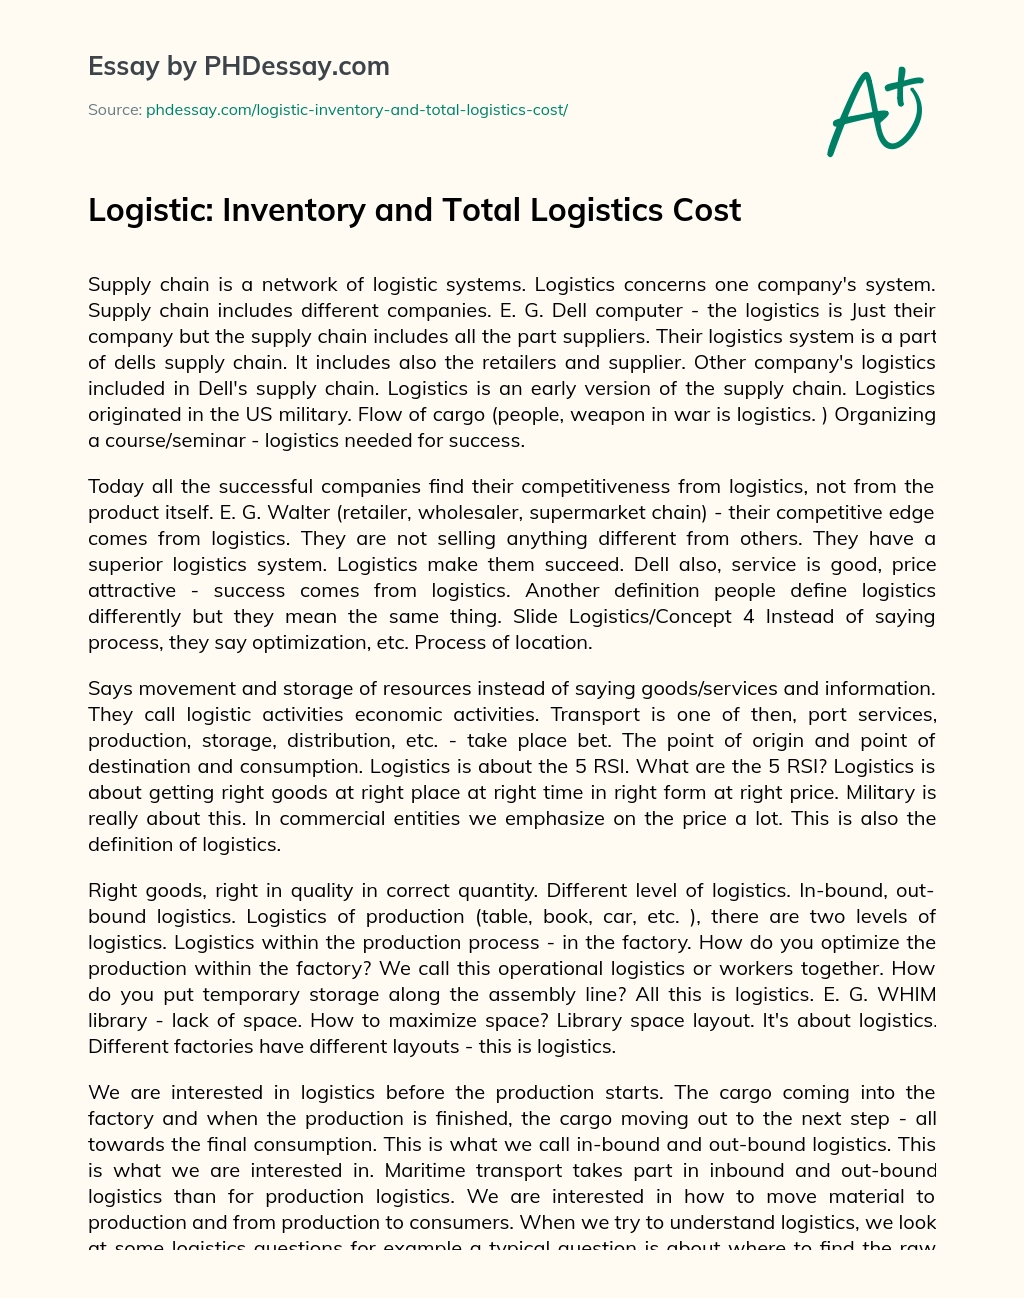 Logistic: Inventory and Total Logistics Cost essay